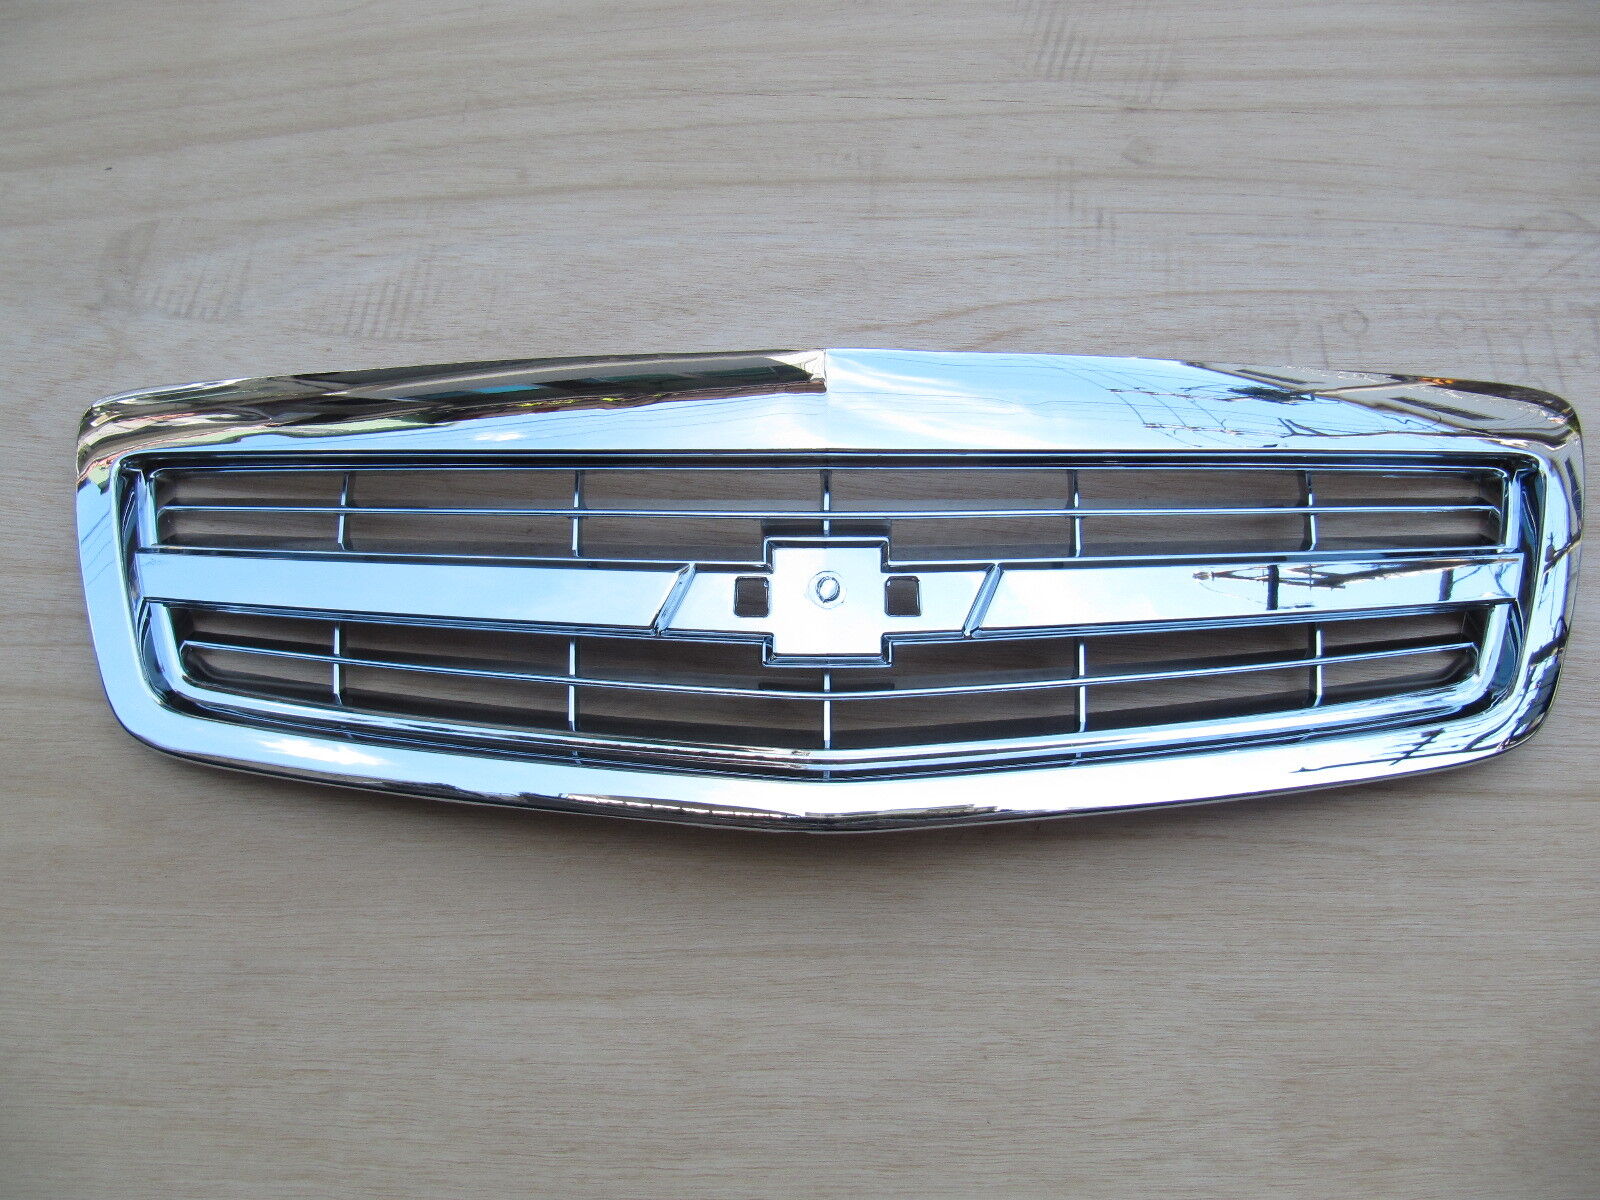 CHEVY CAPRICE PPV Holden WM Statesman Fully CHROME 2011-14 GRILLE  NO EMBLEM